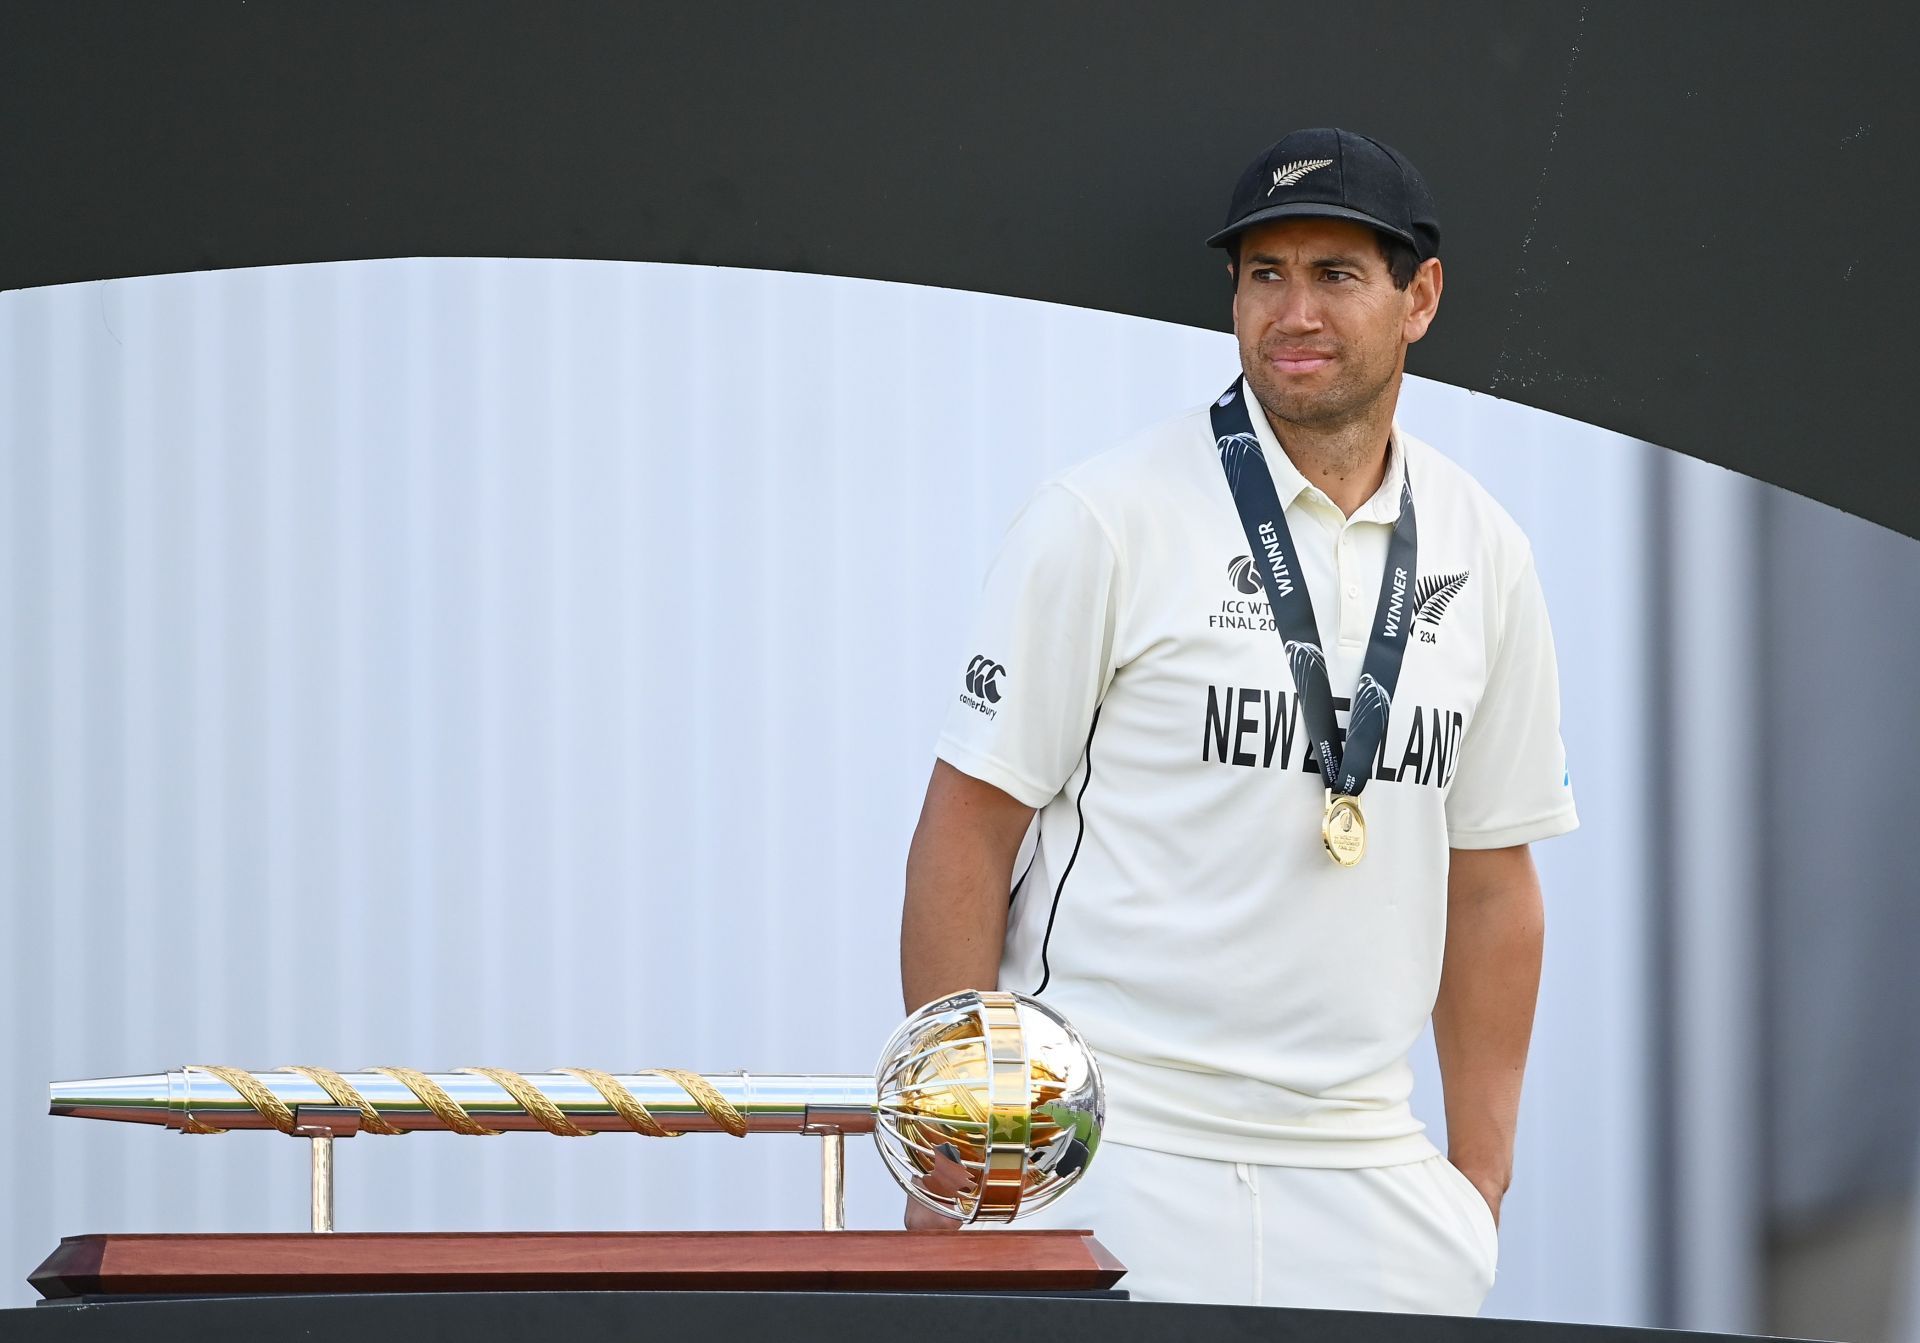 Ross Taylor announced his retirement from all formats of international cricket.